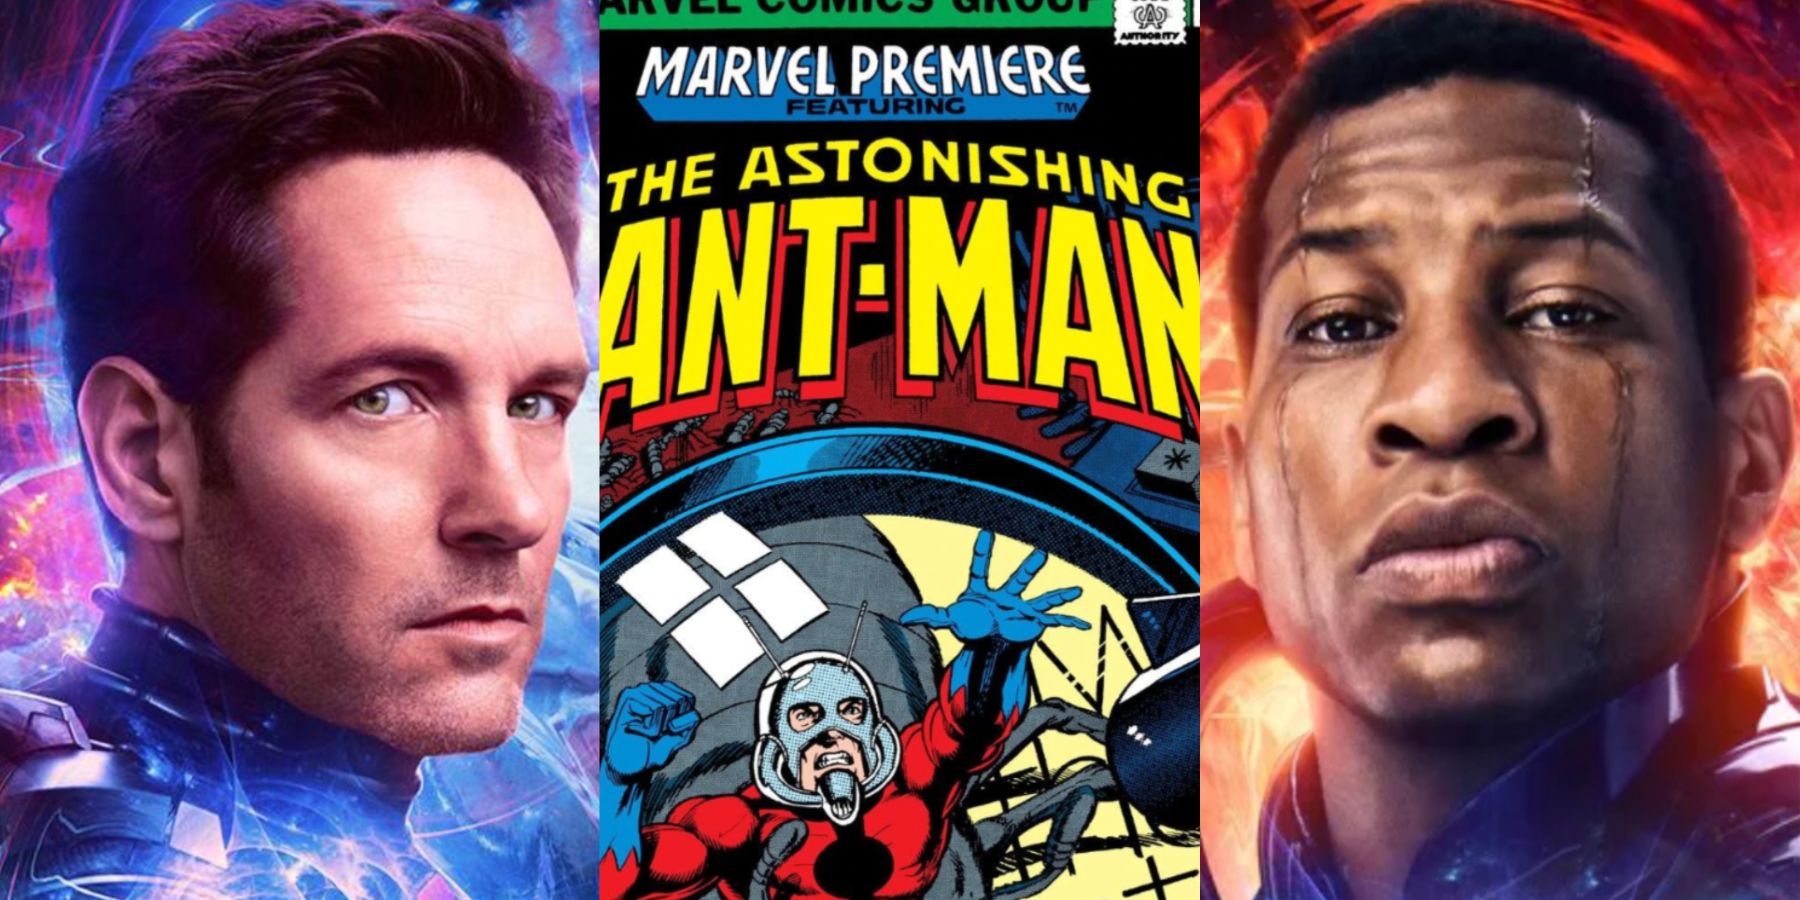 A split image features Scott Lang in the MCU, the cover of Marvel Premiere 47, and Kang in the MCU